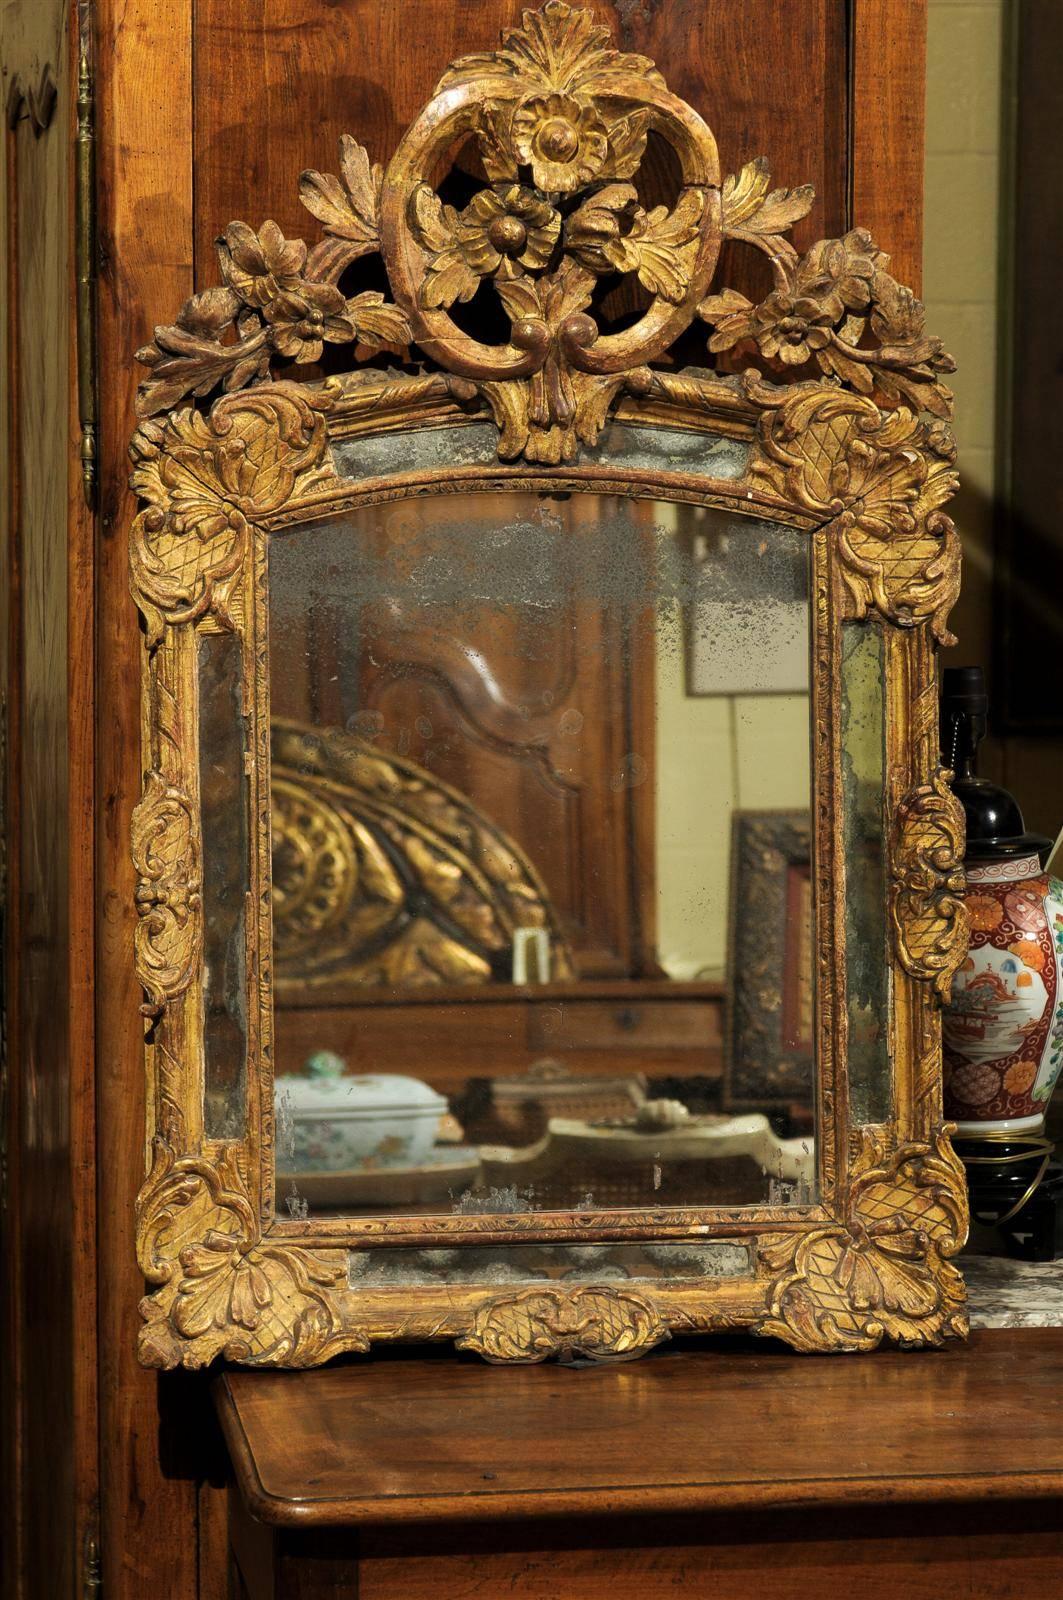 Early 18th century French transitional Regence/Louis XIV giltwood mirror with flower carving.